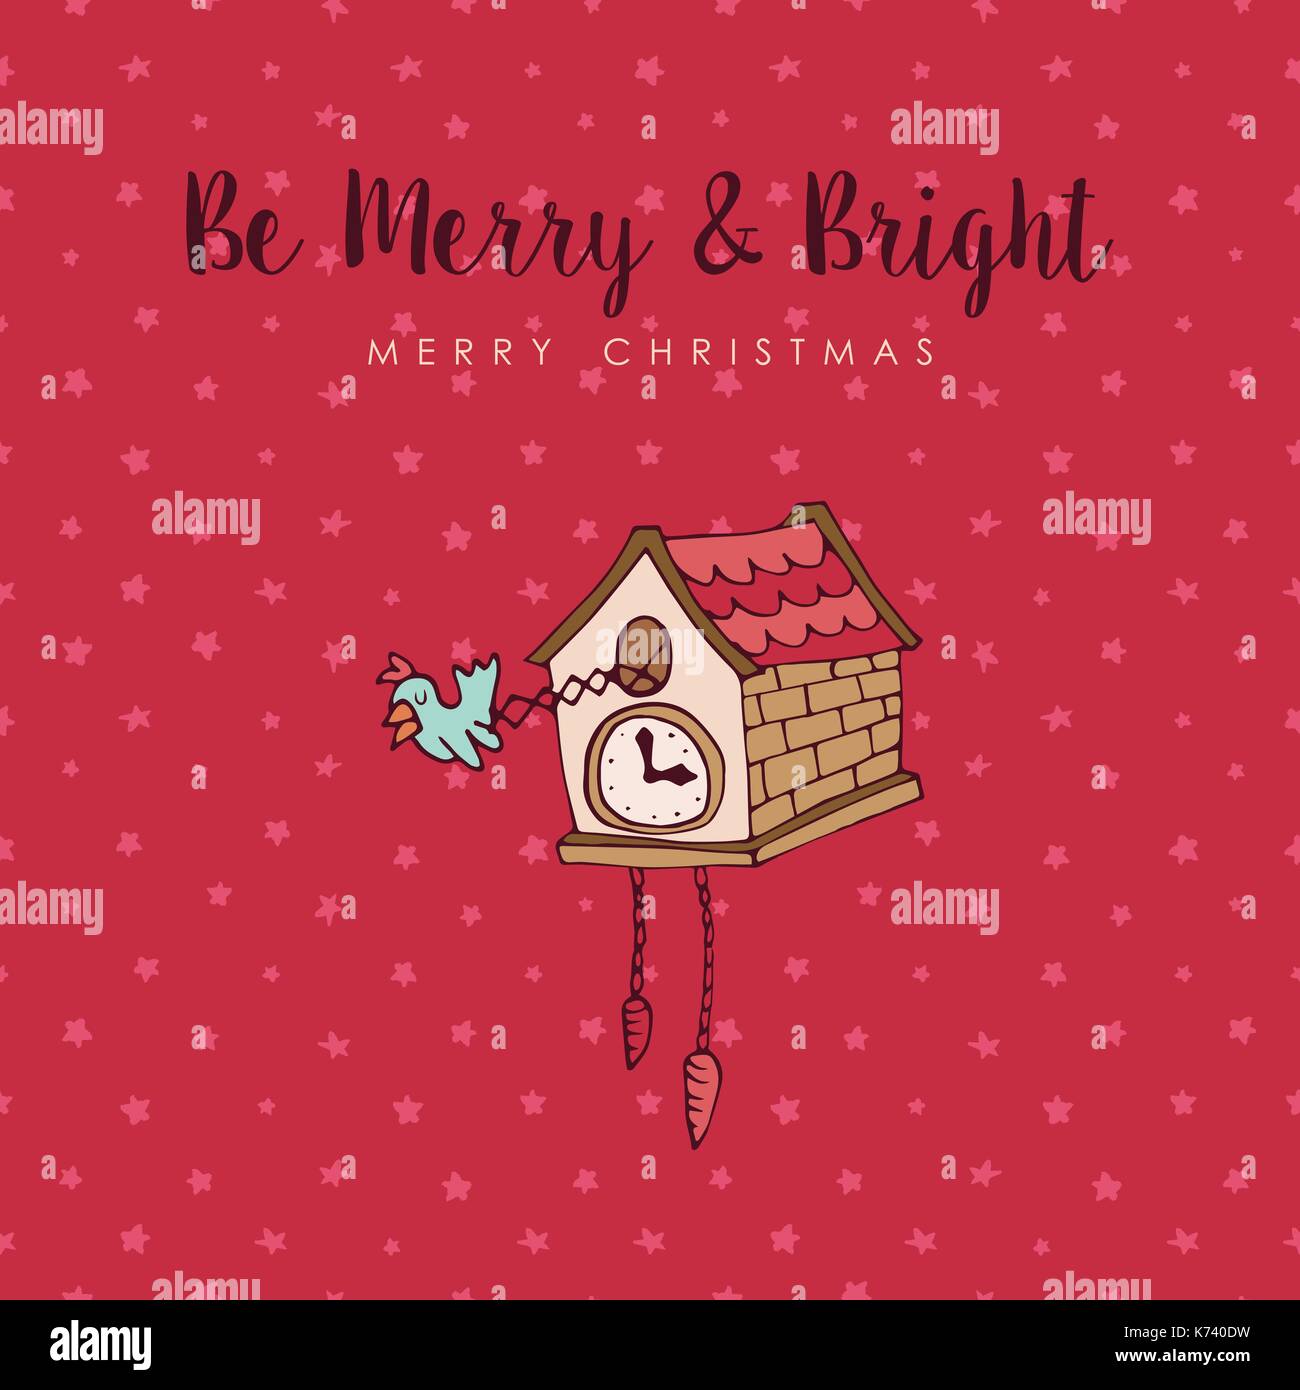 Merry Christmas  hand drawn decoration greeting card. Cute bird clock cartoon with holiday typography quote. EPS10 vector. Stock Vector